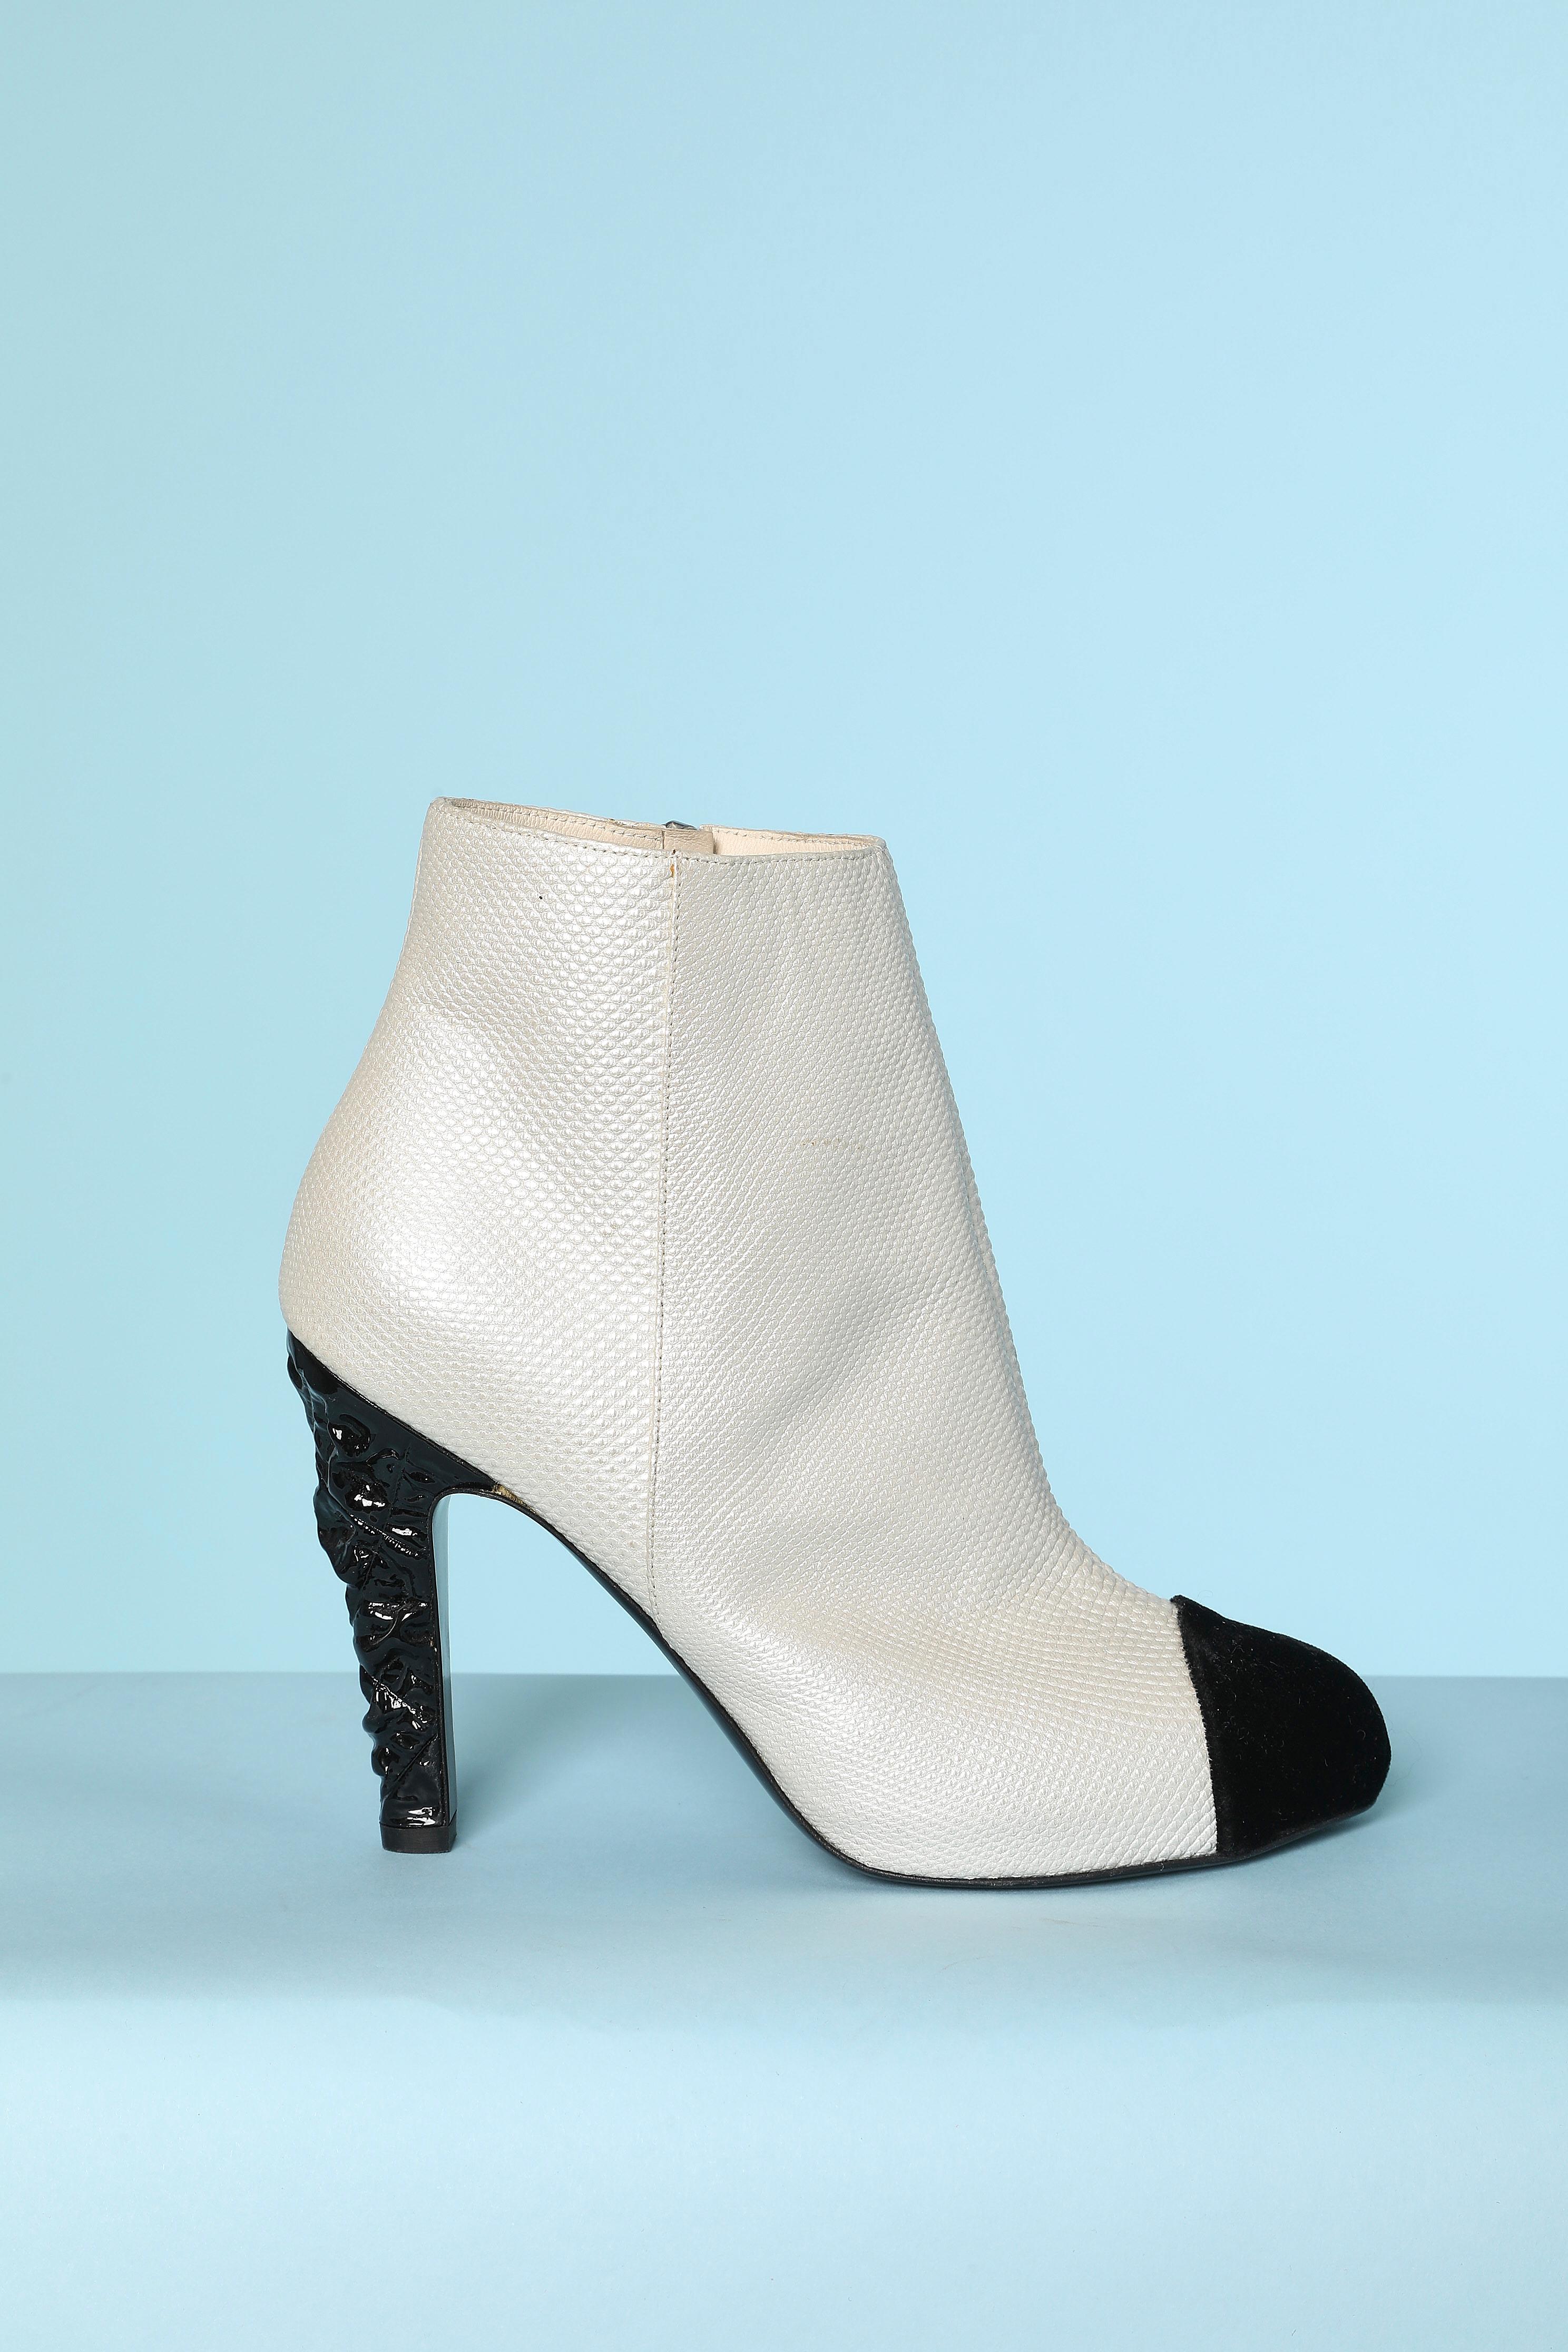 Black and white high-heels boots in leather ( python effect ) and velvet black shoe tip . Sculpted heel 